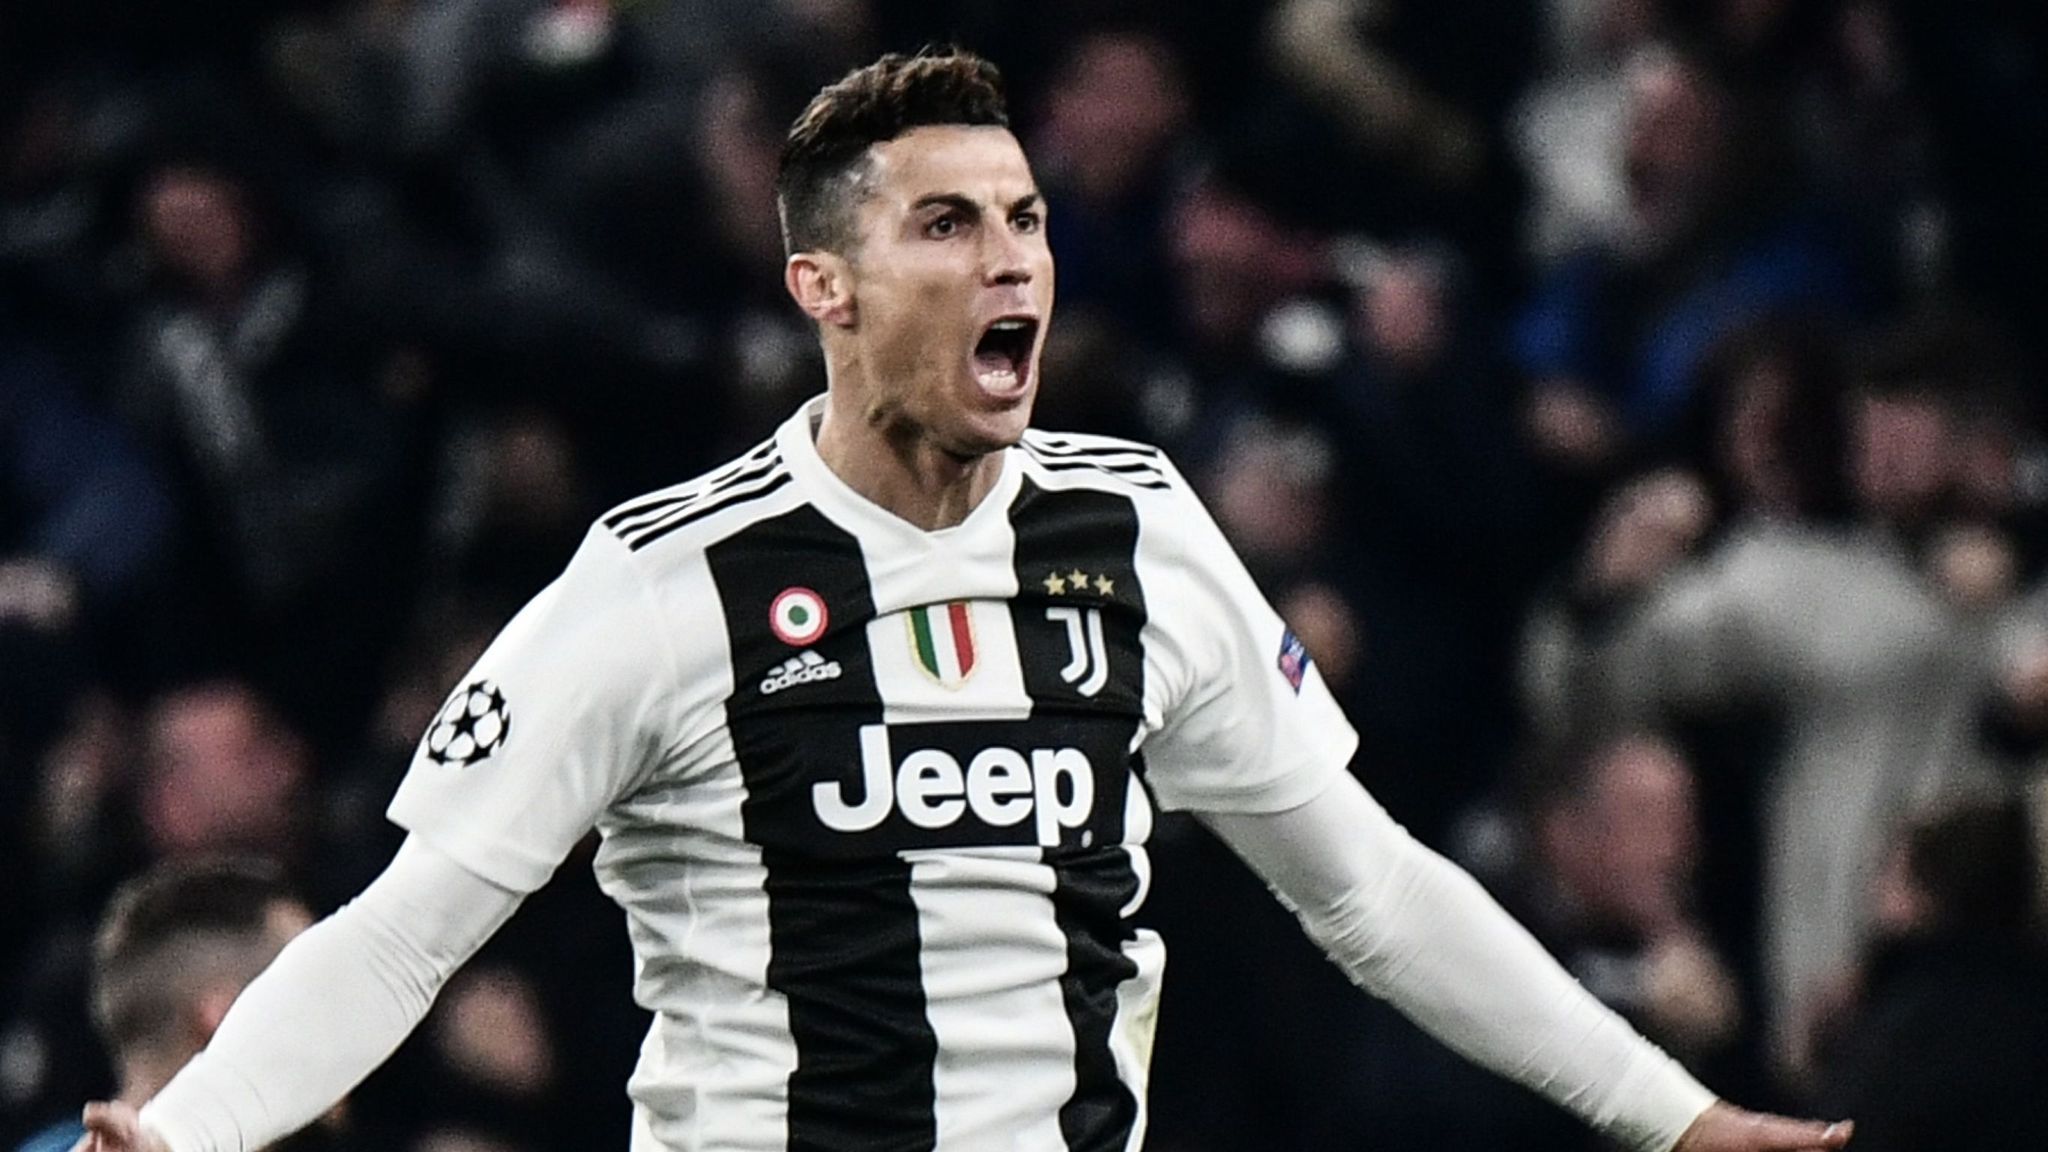 Juventus FC - Facts and data